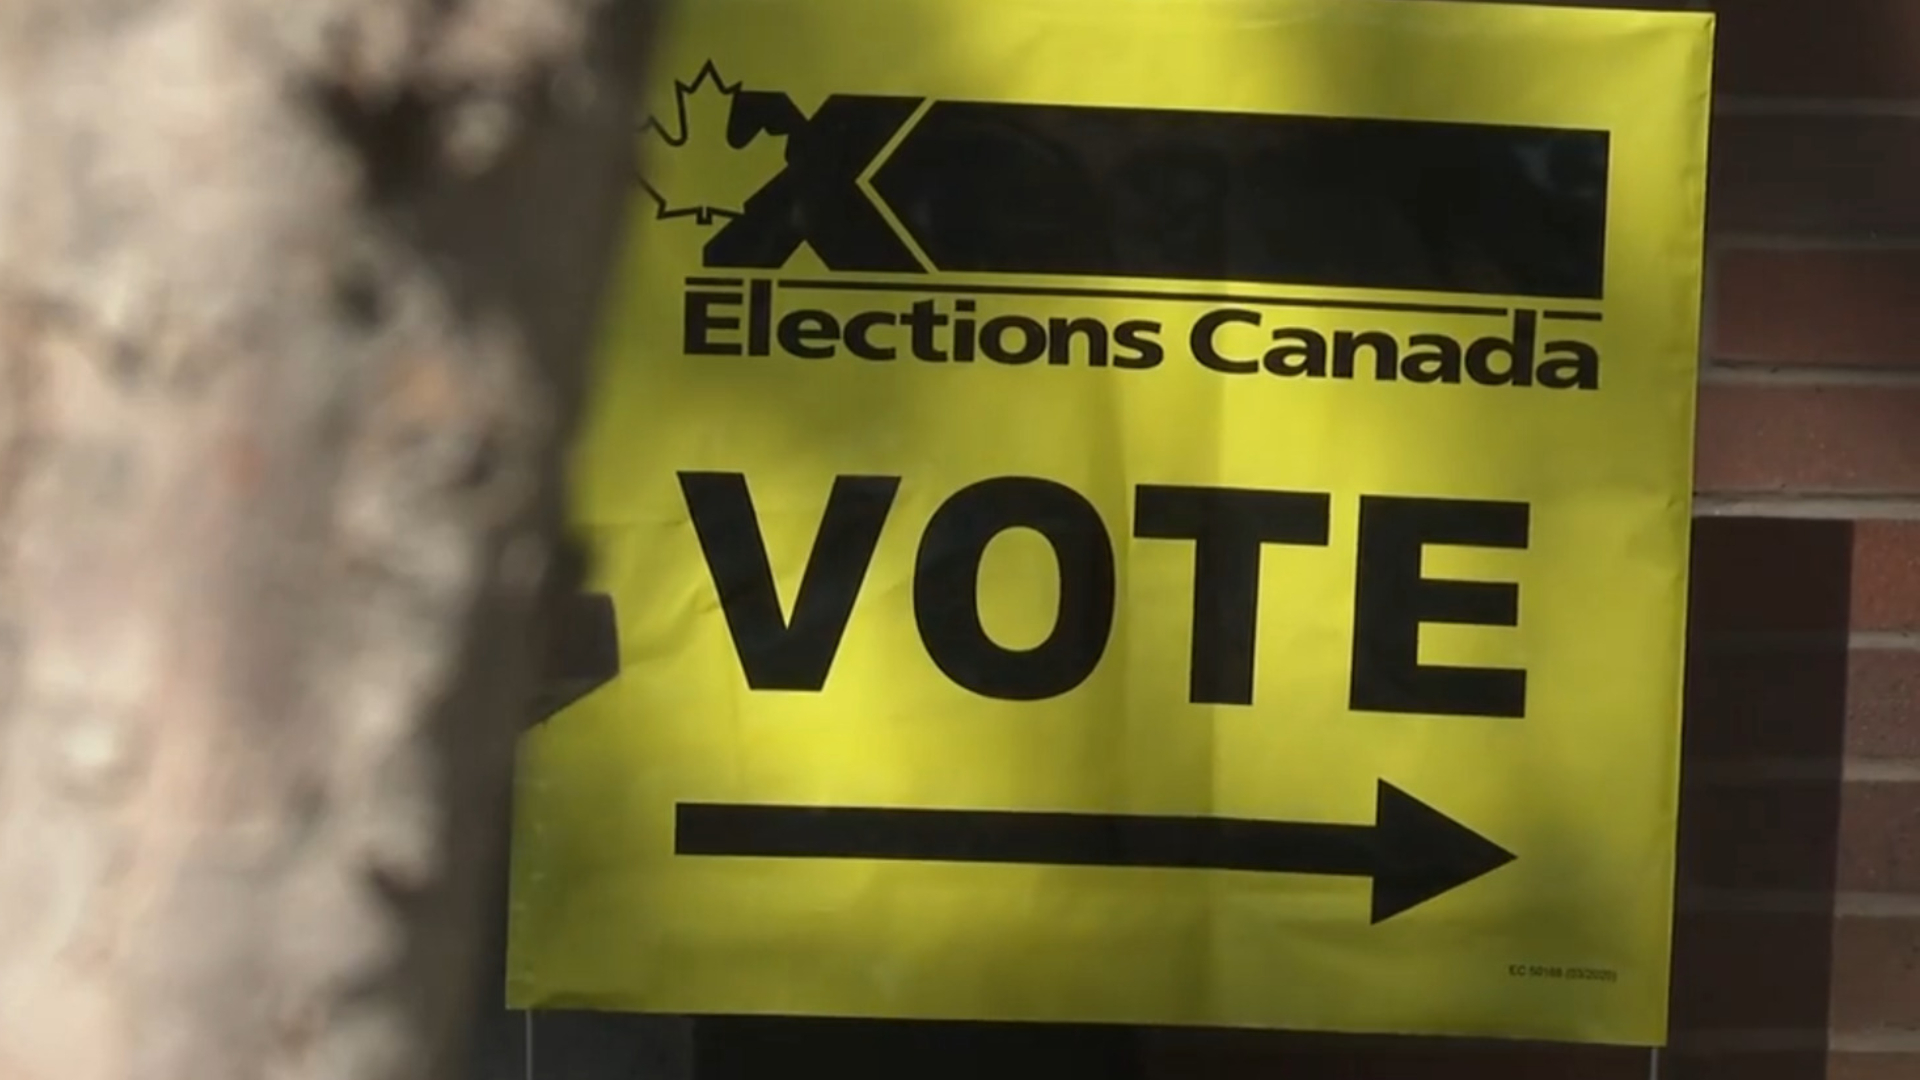 Did foreign countries interfere with Canadian elections?